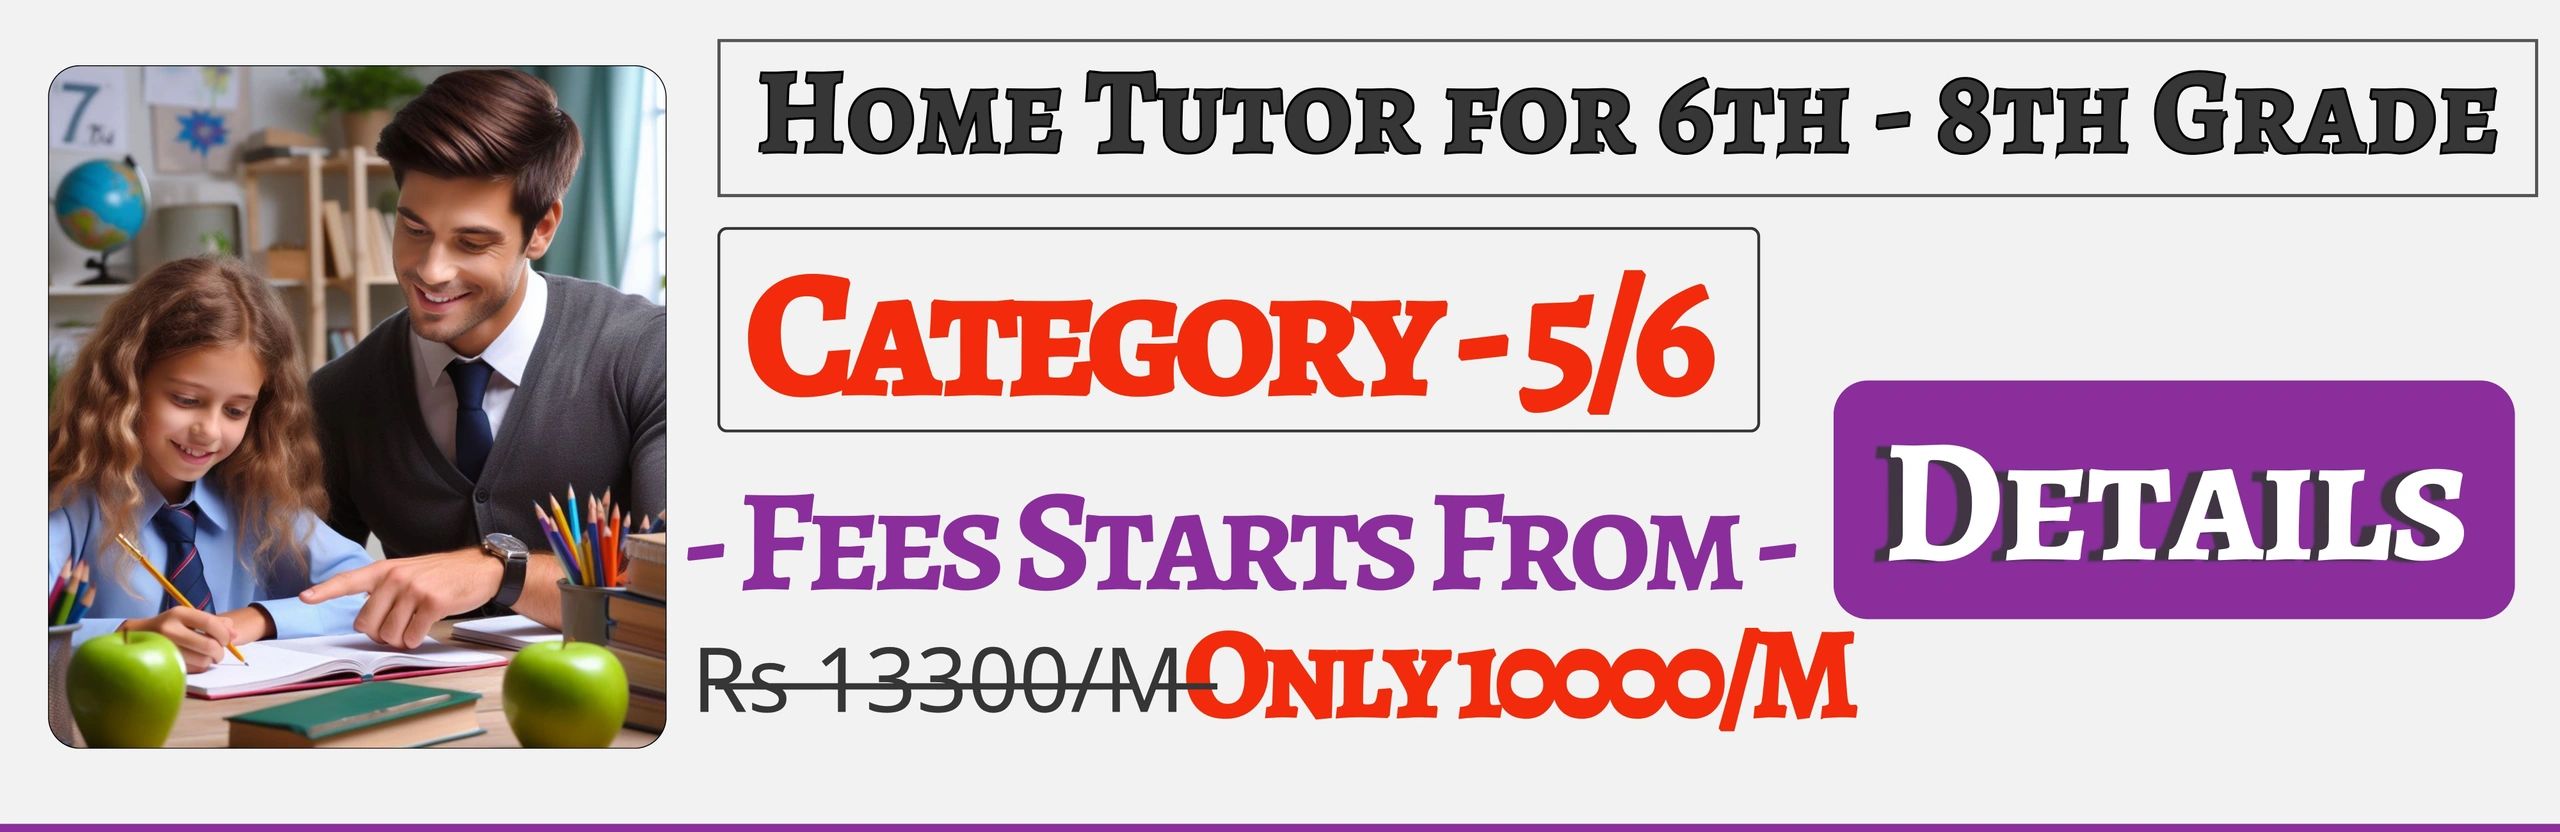 Book Best Home Tuition Tutors For 6th 7th & 8th In Jaipur Fees Only 10000/M